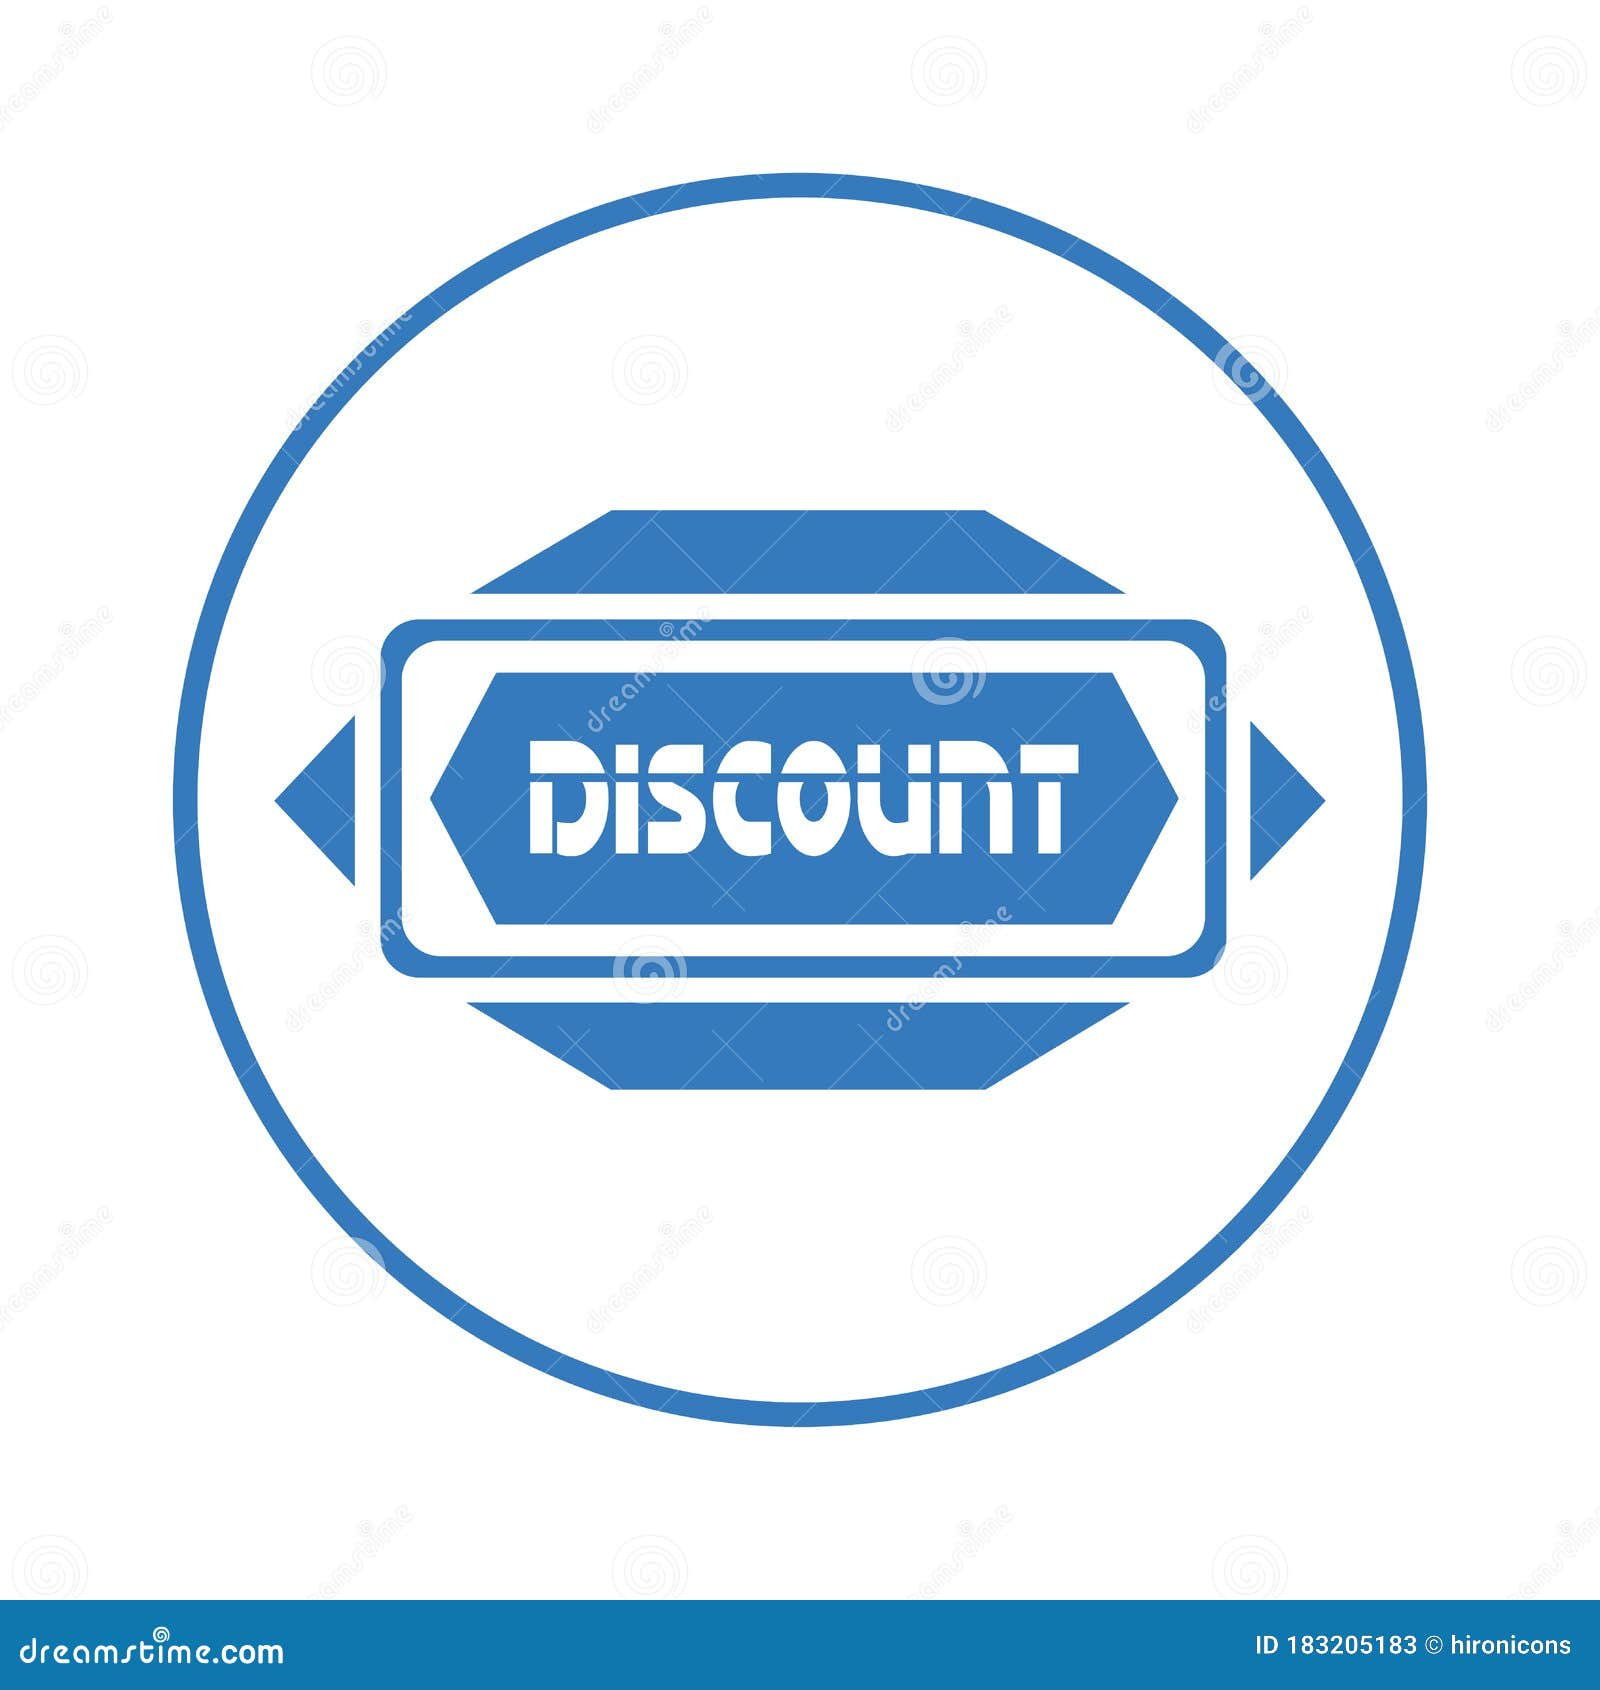 discount, discounting, sticker blue icon